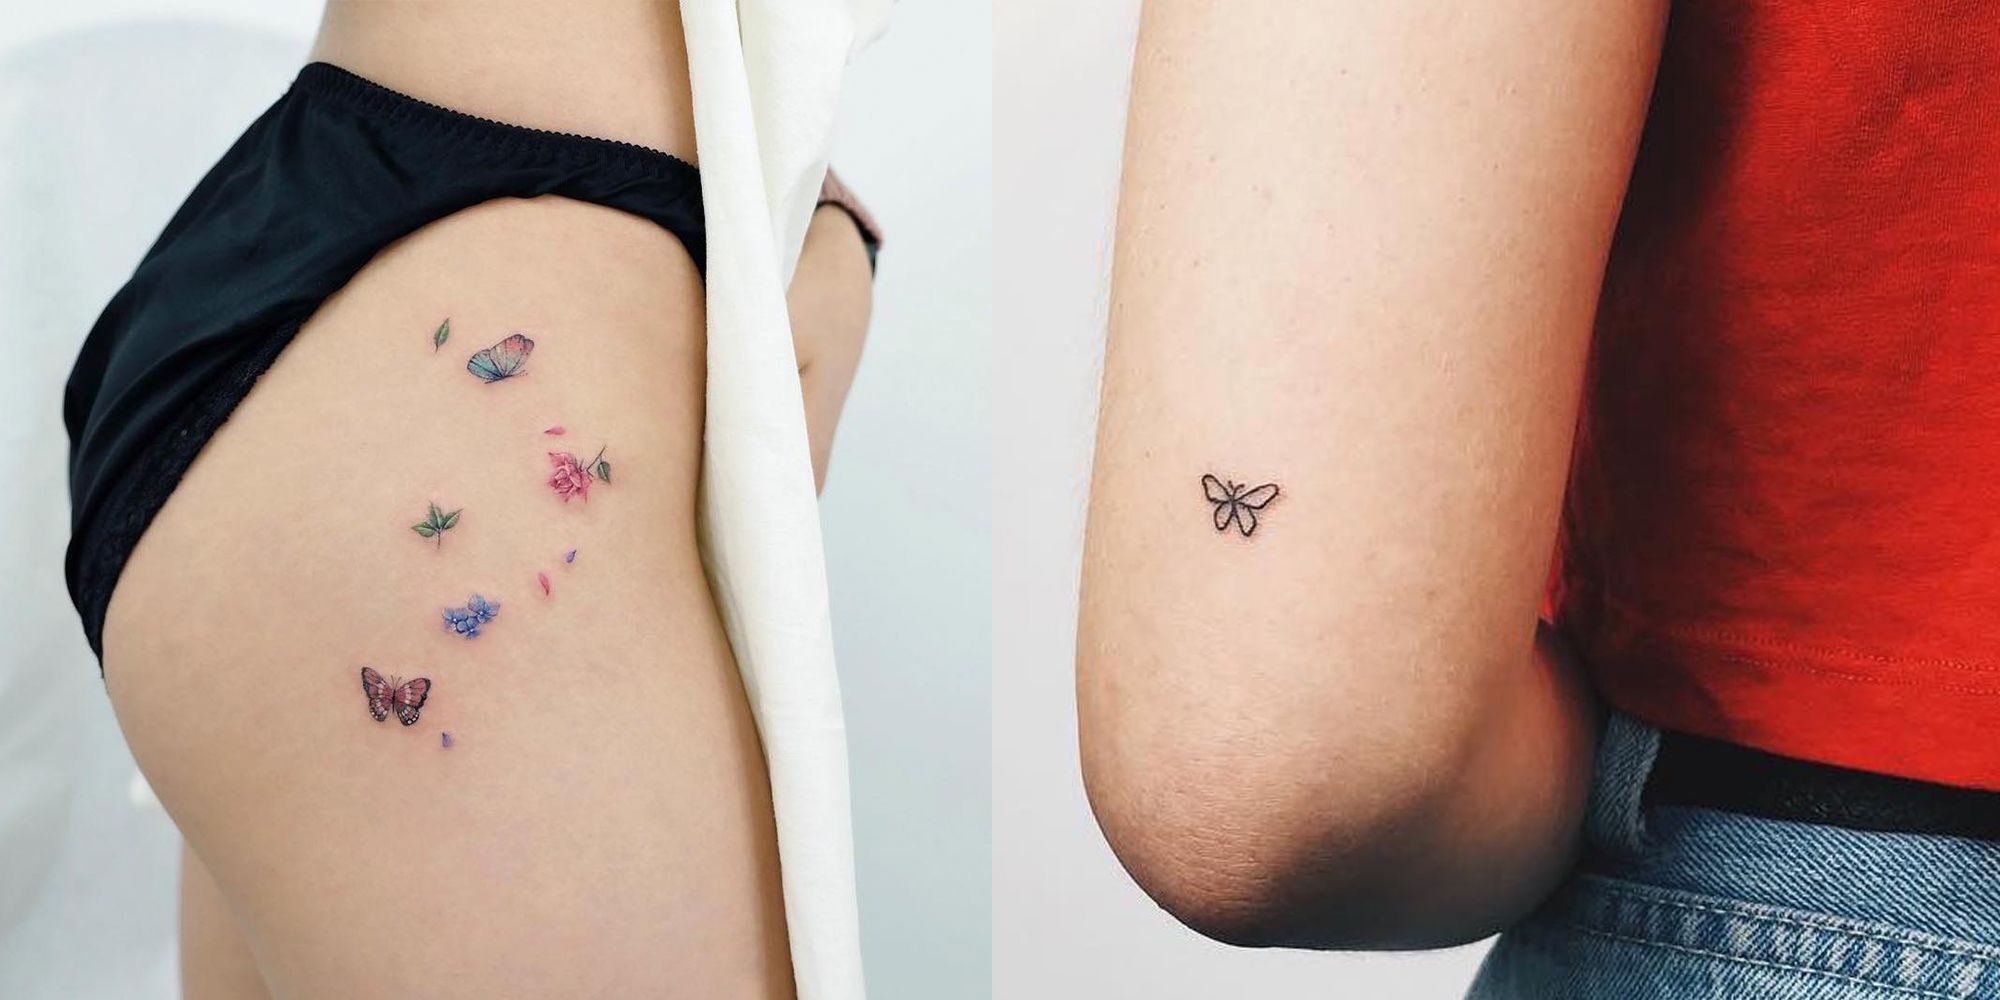 17 Butterfly Tattoo Ideas That Are Pretty Not Tacky Pictures Of